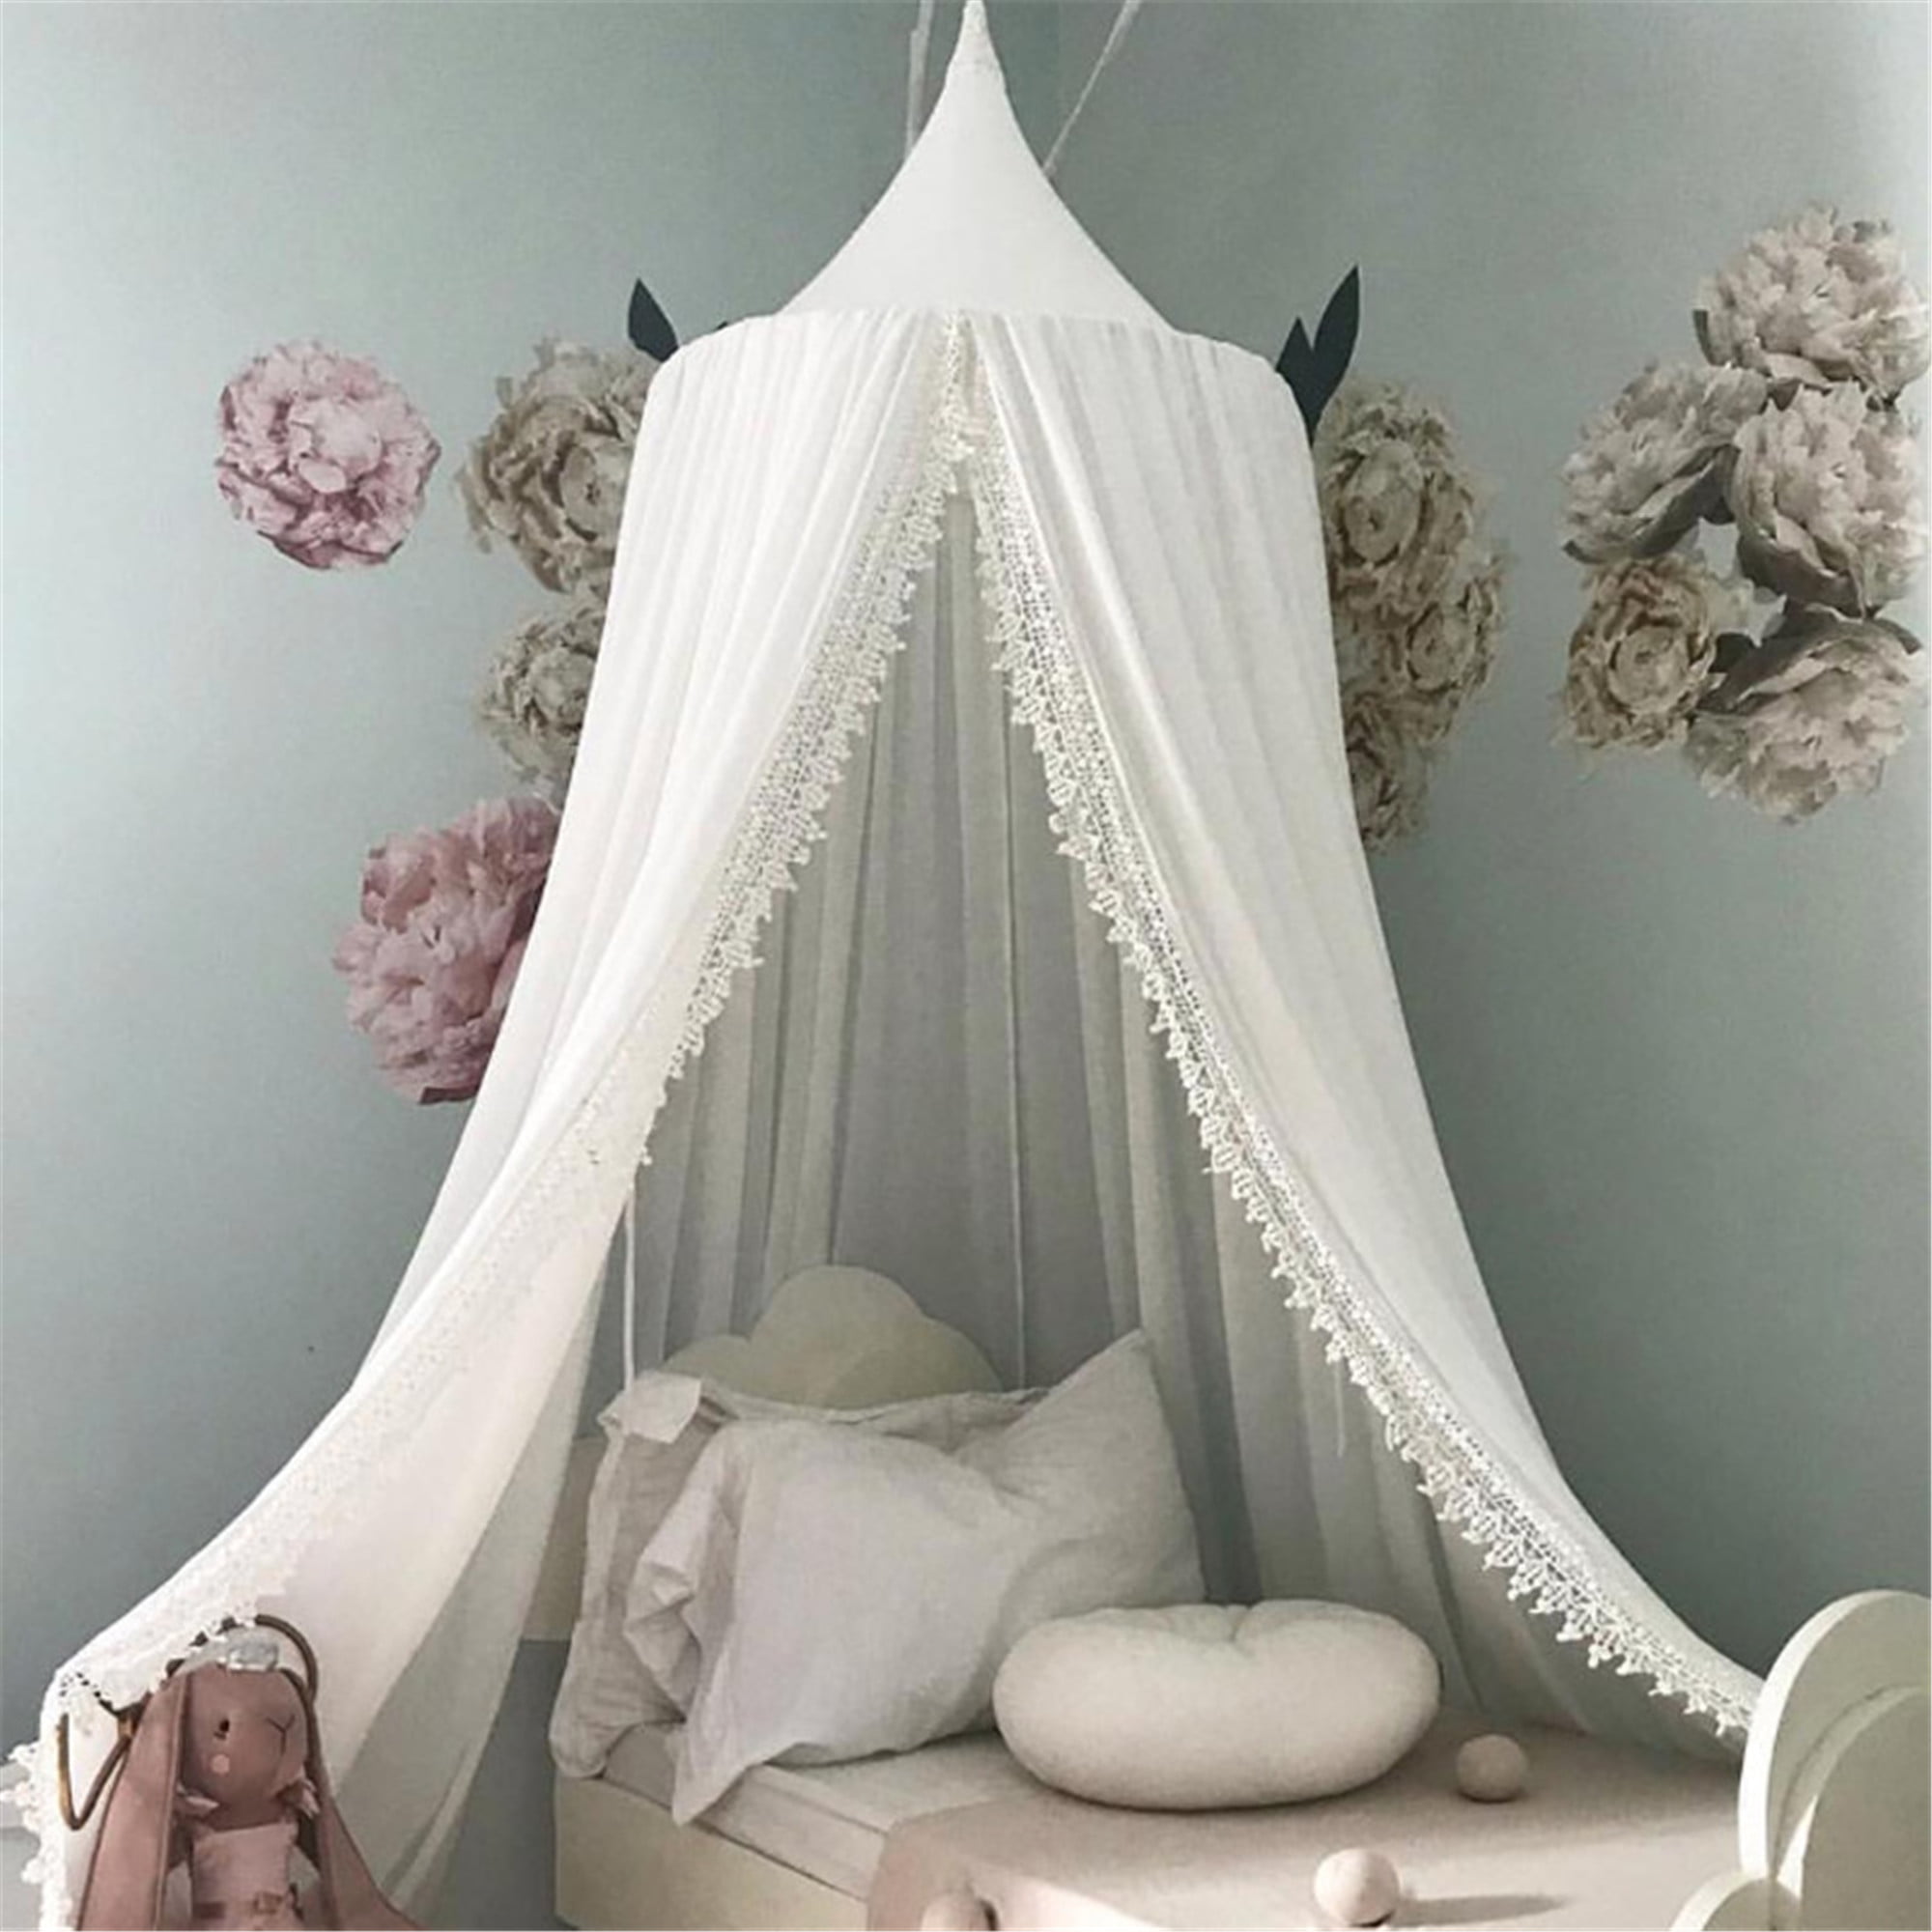 Pink Toddler Chiffon Crib Canopy Princess Round Dome Tassel Playing Reading Tent Castle Decoration Bed Canopy Mosquito Net Curtains For Children Bed